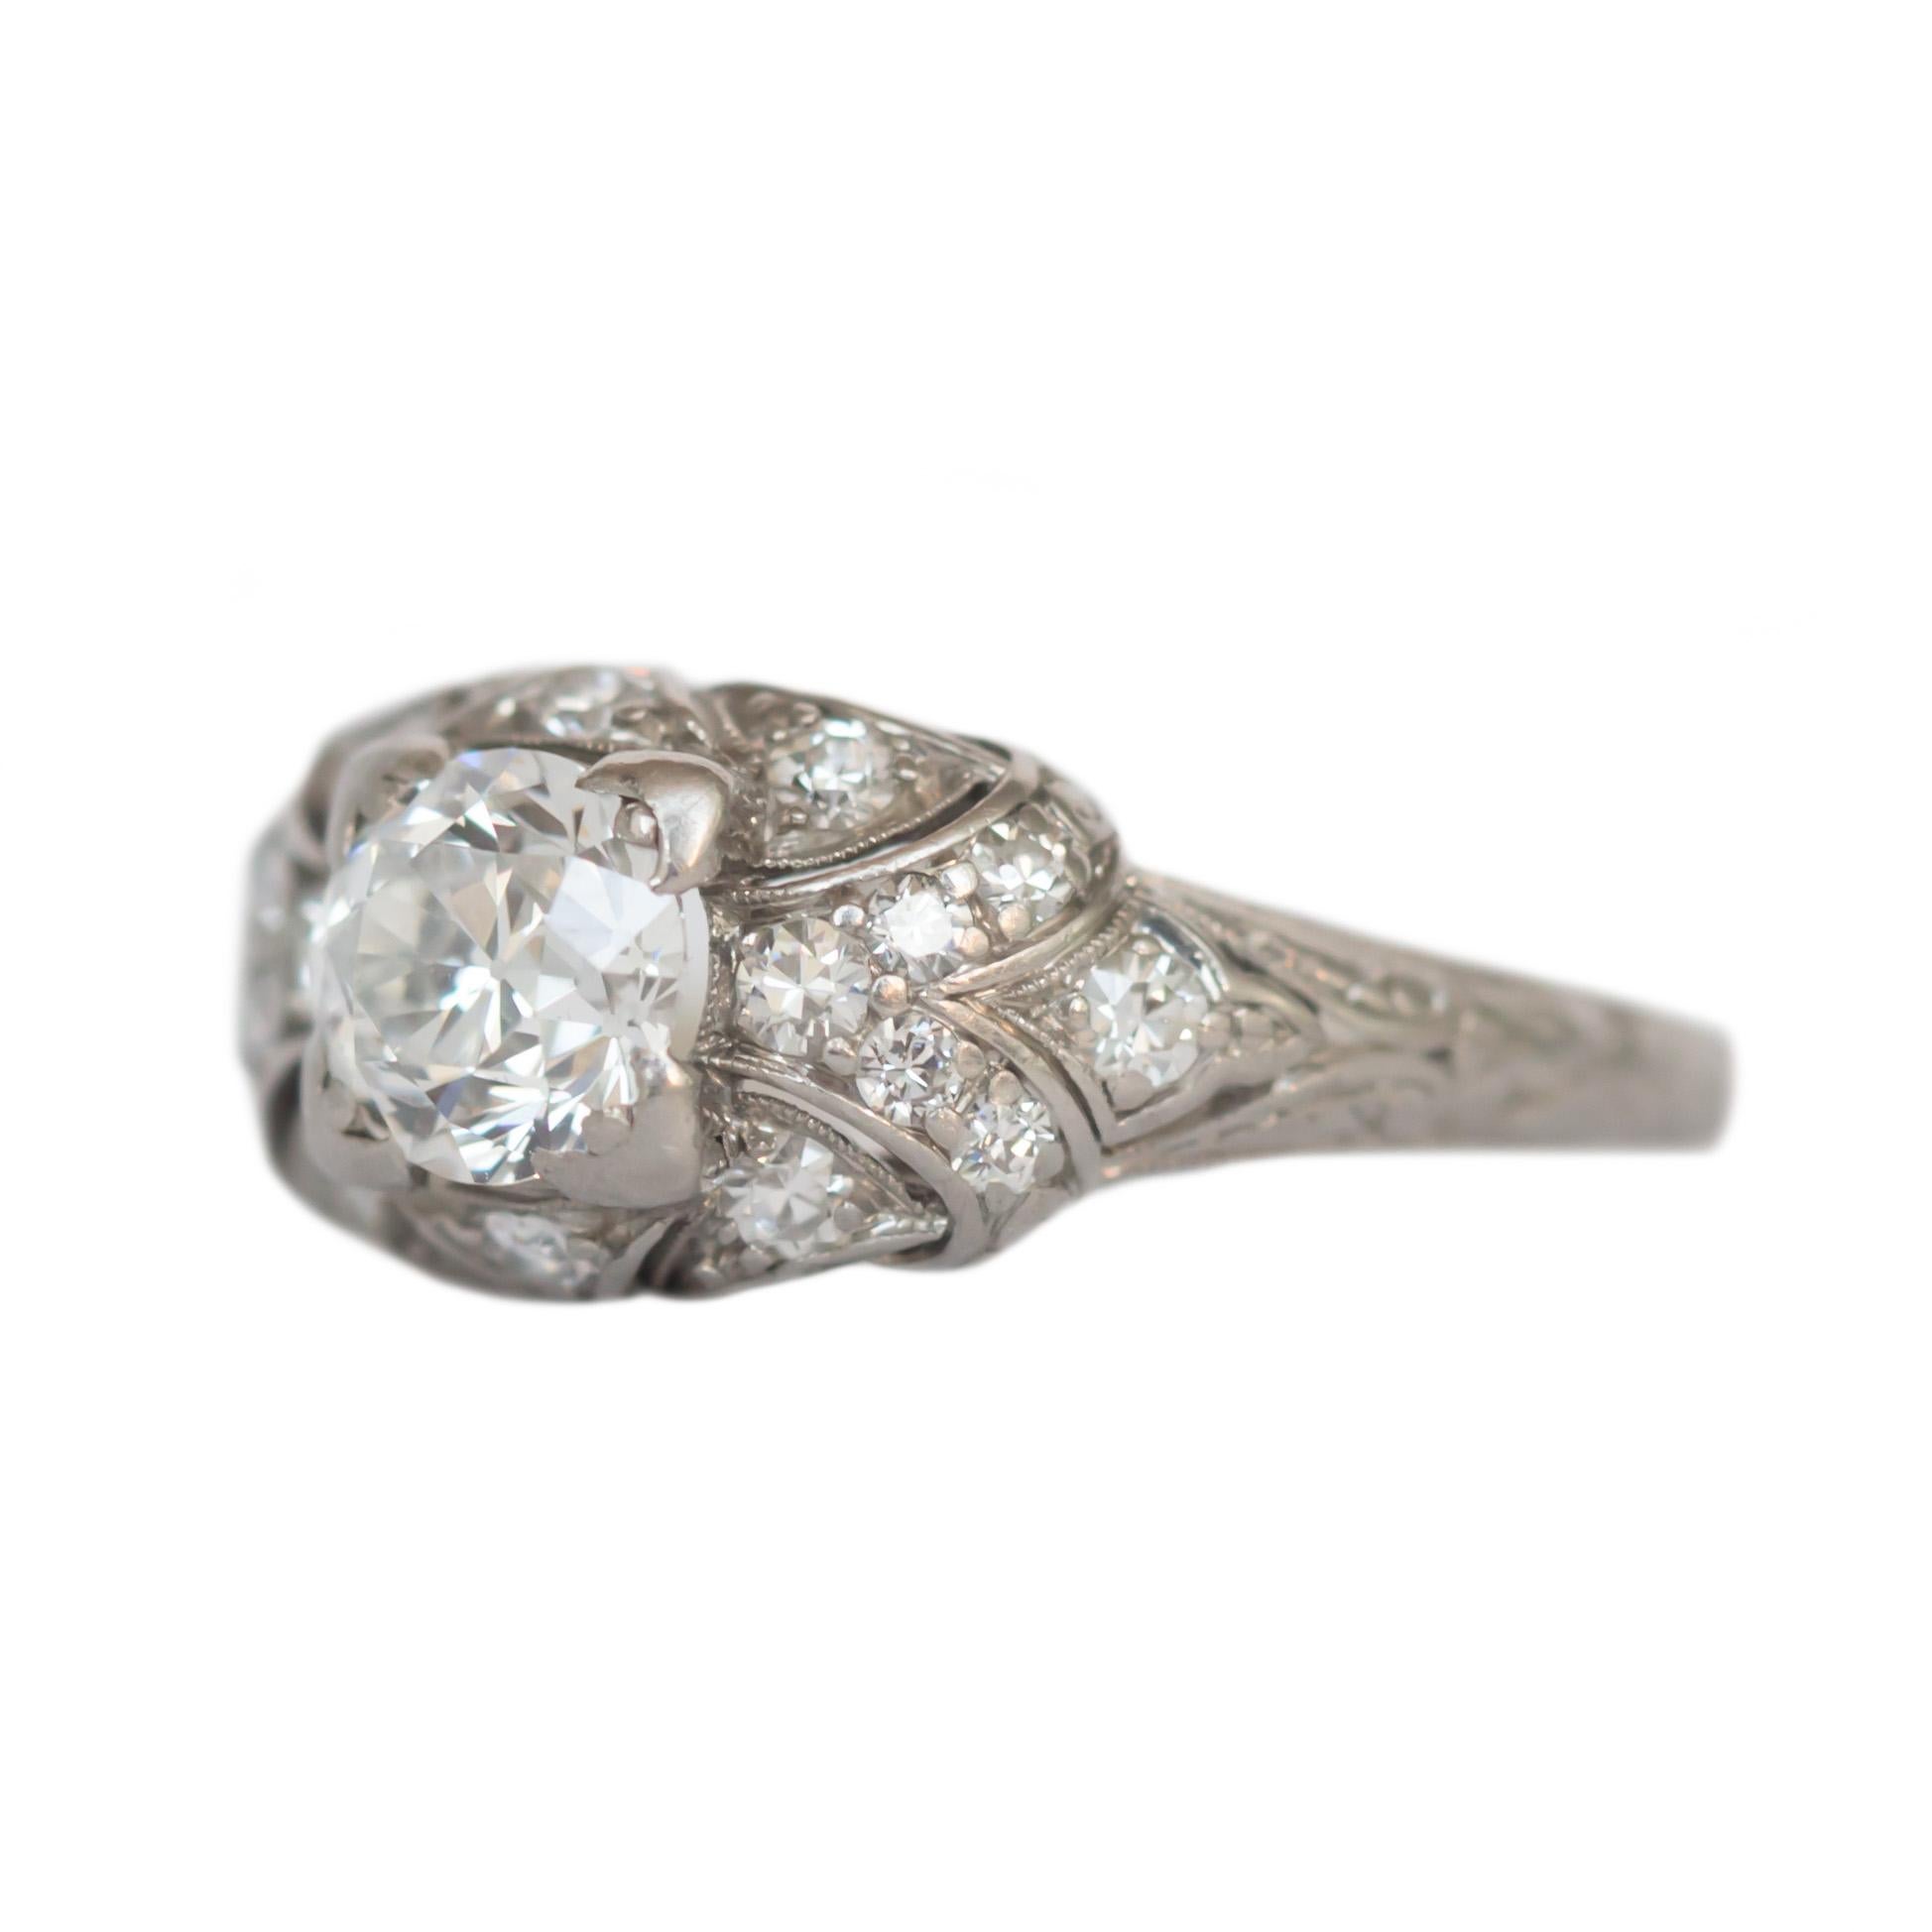 Ring Size: 7.75
Metal Type: Platinum [Hallmarked, and Tested]
Weight: 3.5 grams

Center Diamond Details:
Weight: .68 carat
Cut: Old European Brilliant
Color: I
Clarity: VS1 

Side Diamond Details:
Weight: .20 carat, total weight
Cut: Antique Single